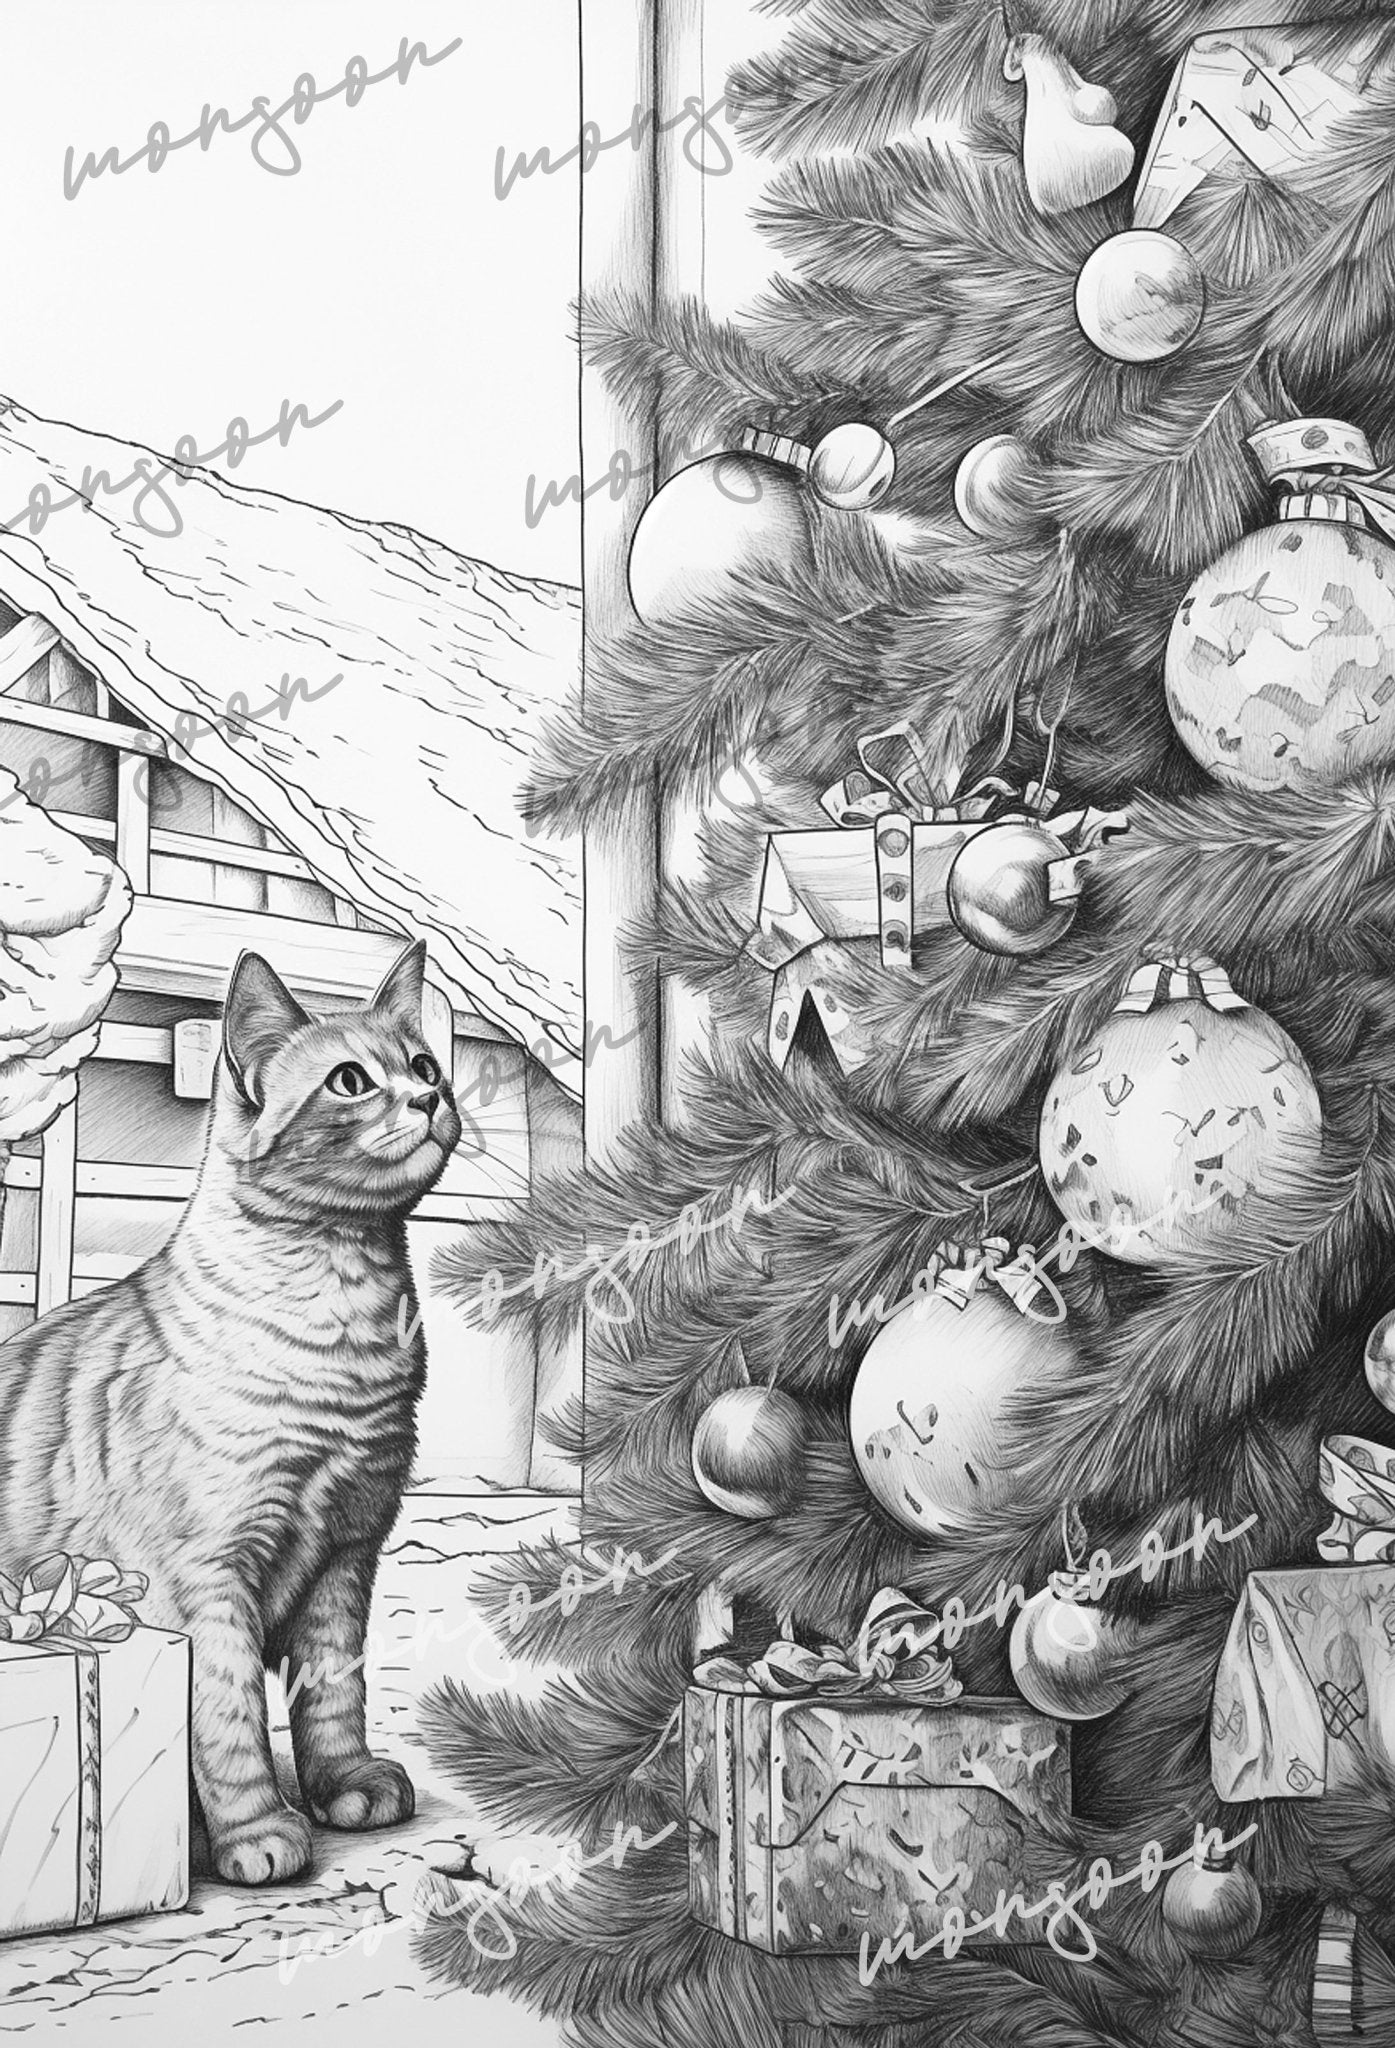 Cats in Christmas Trees Coloring Book Grayscale (Digital) - Monsoon Publishing USA